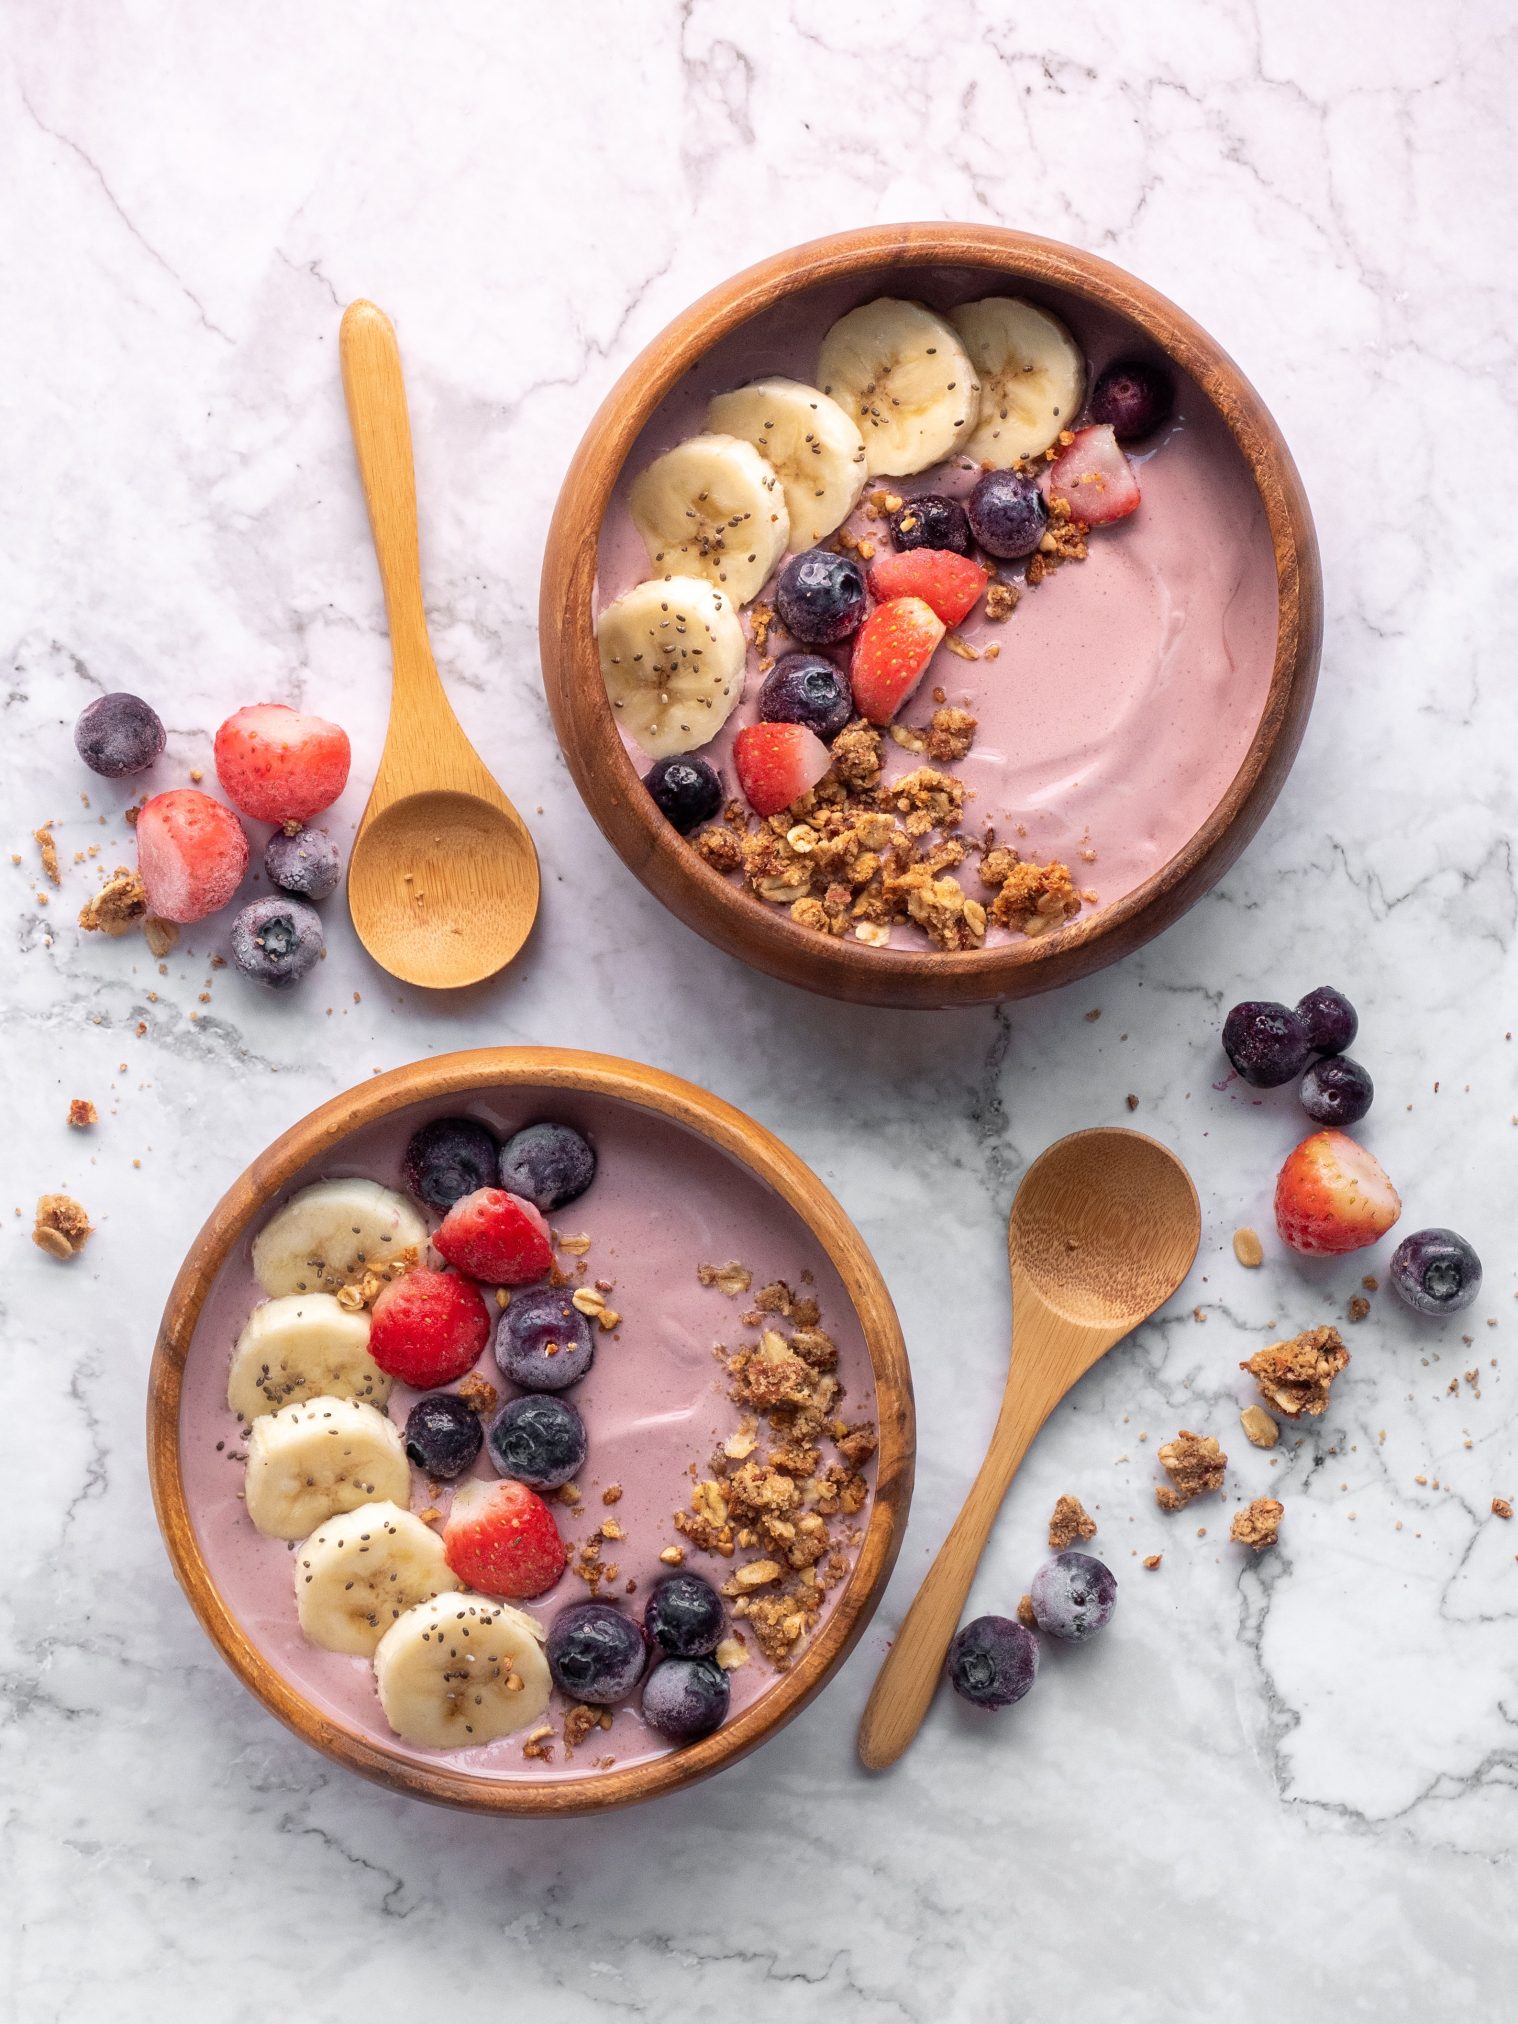 Pink-colored smoothies topped with bananas, berries and granola in 2 wooden bowls next to two wooden spoons.